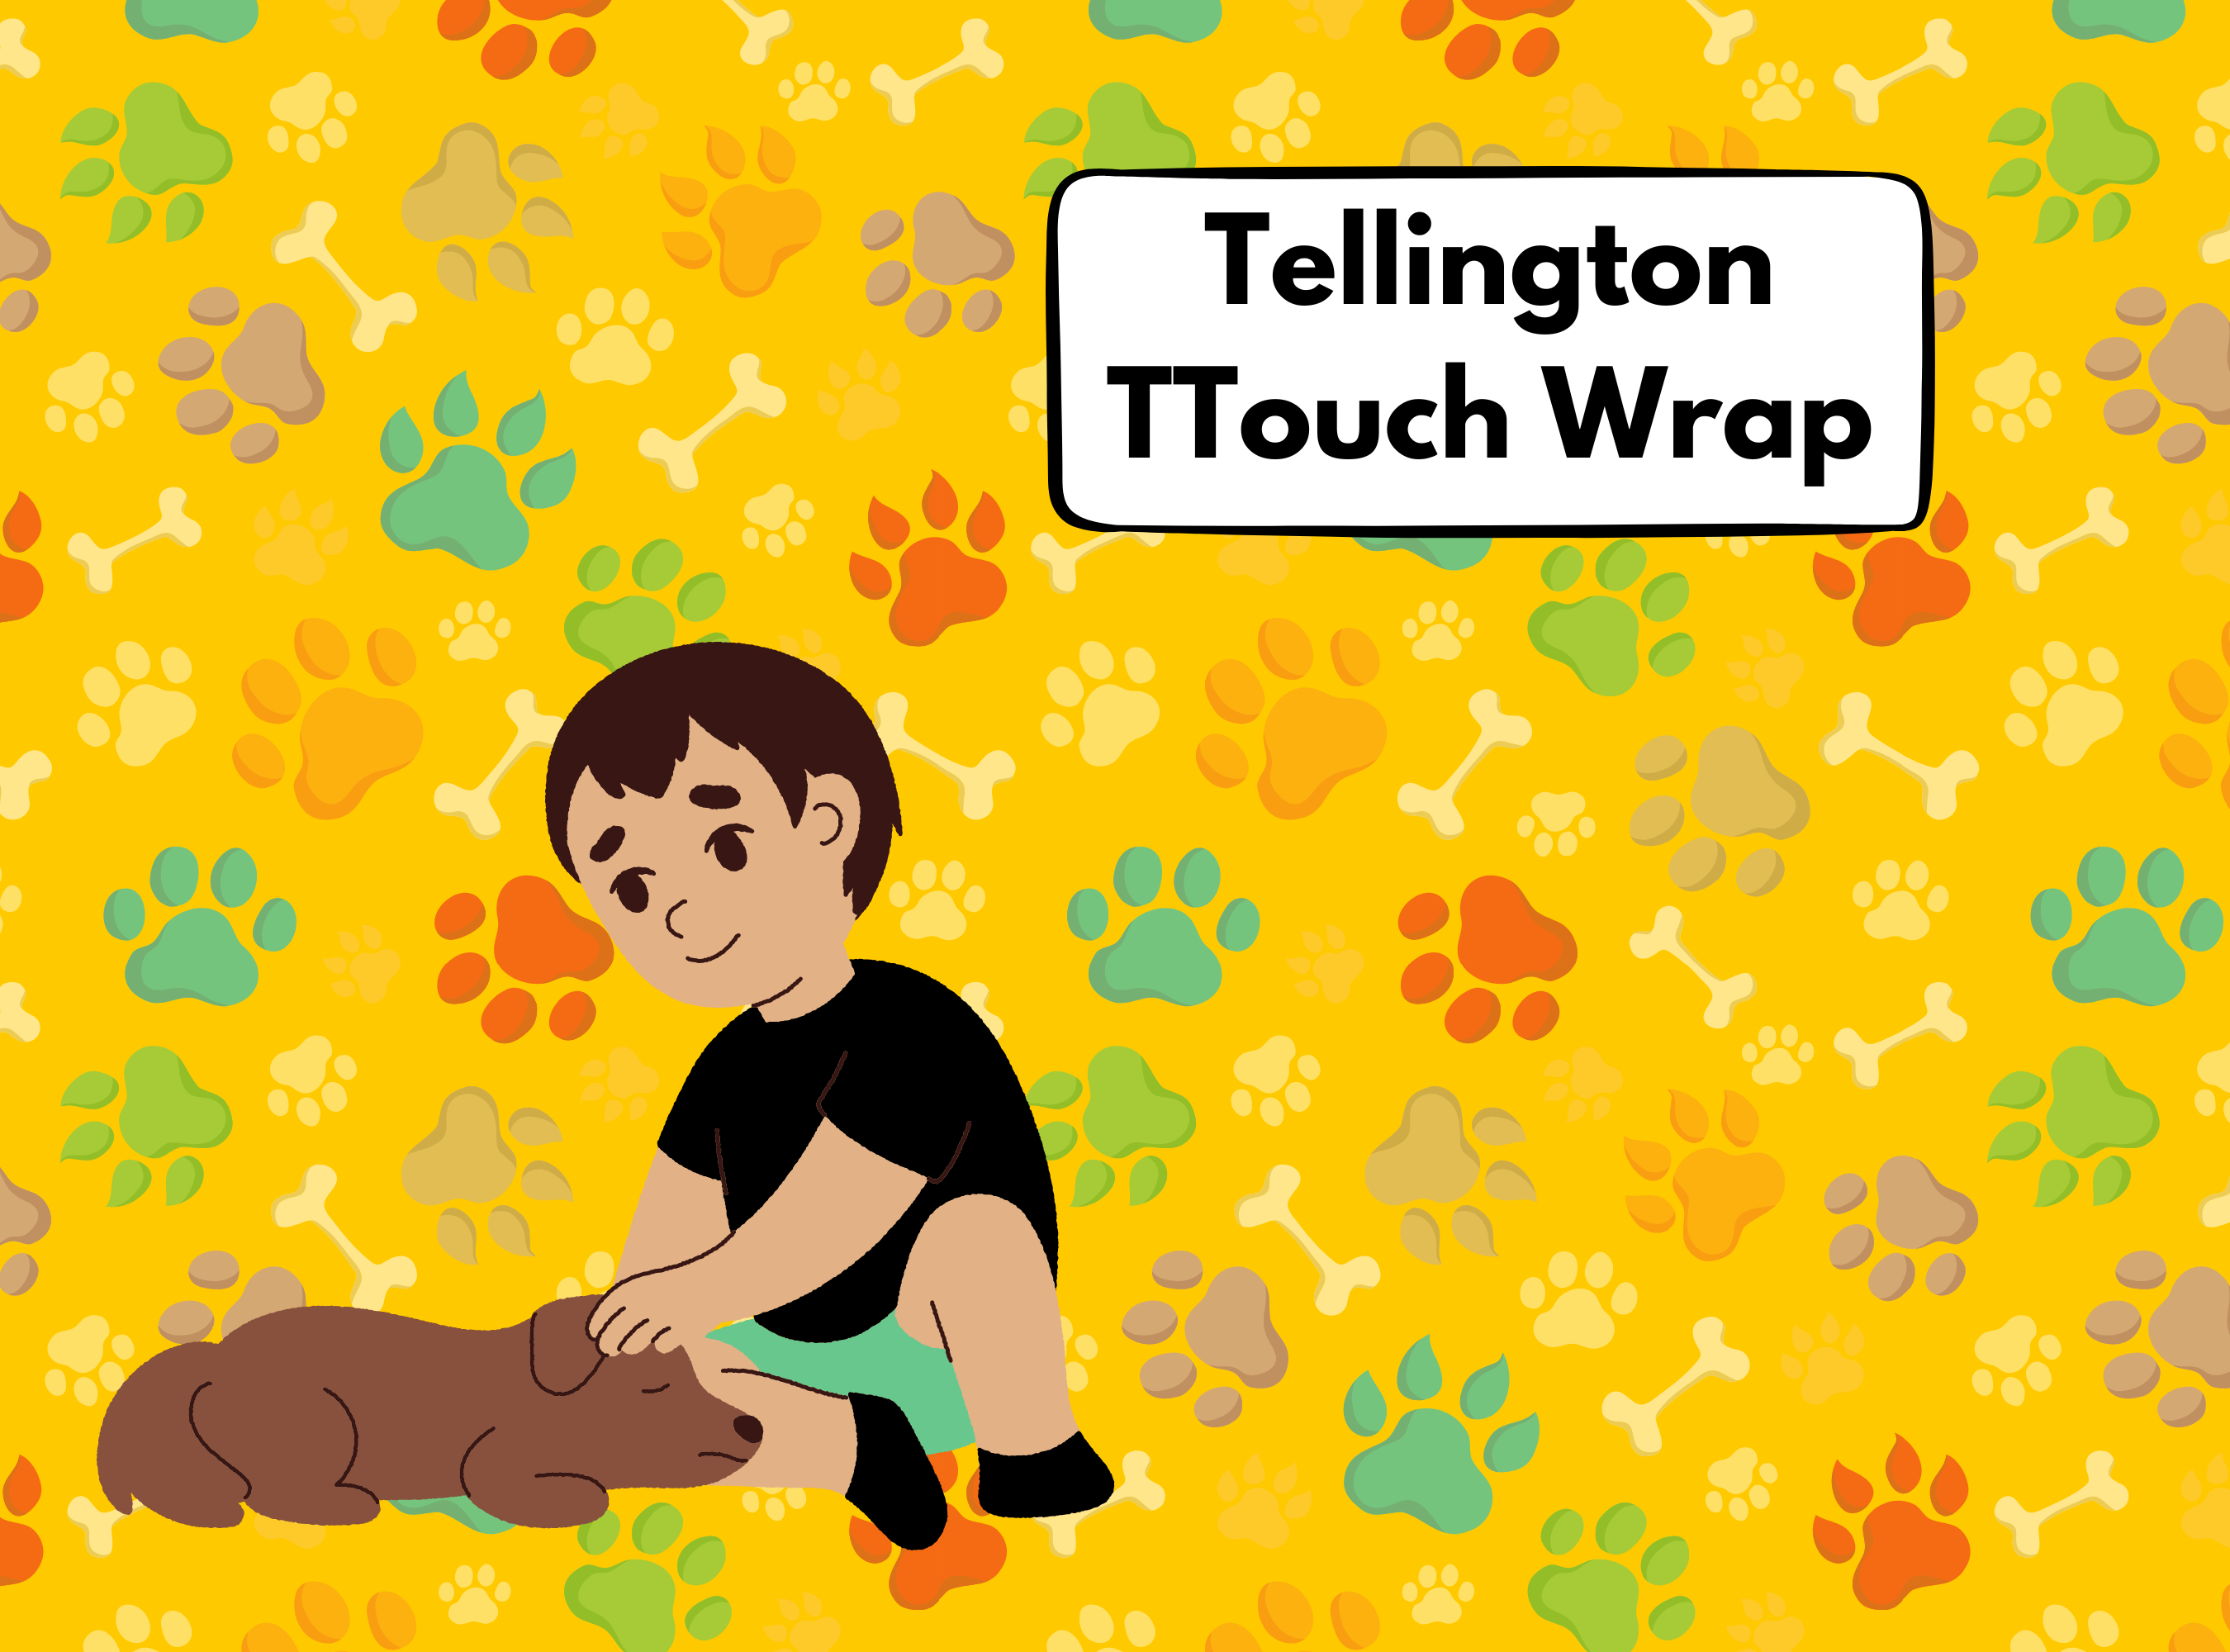 Deal dog stress and anxiety - Tellington TTouch Wrap Method